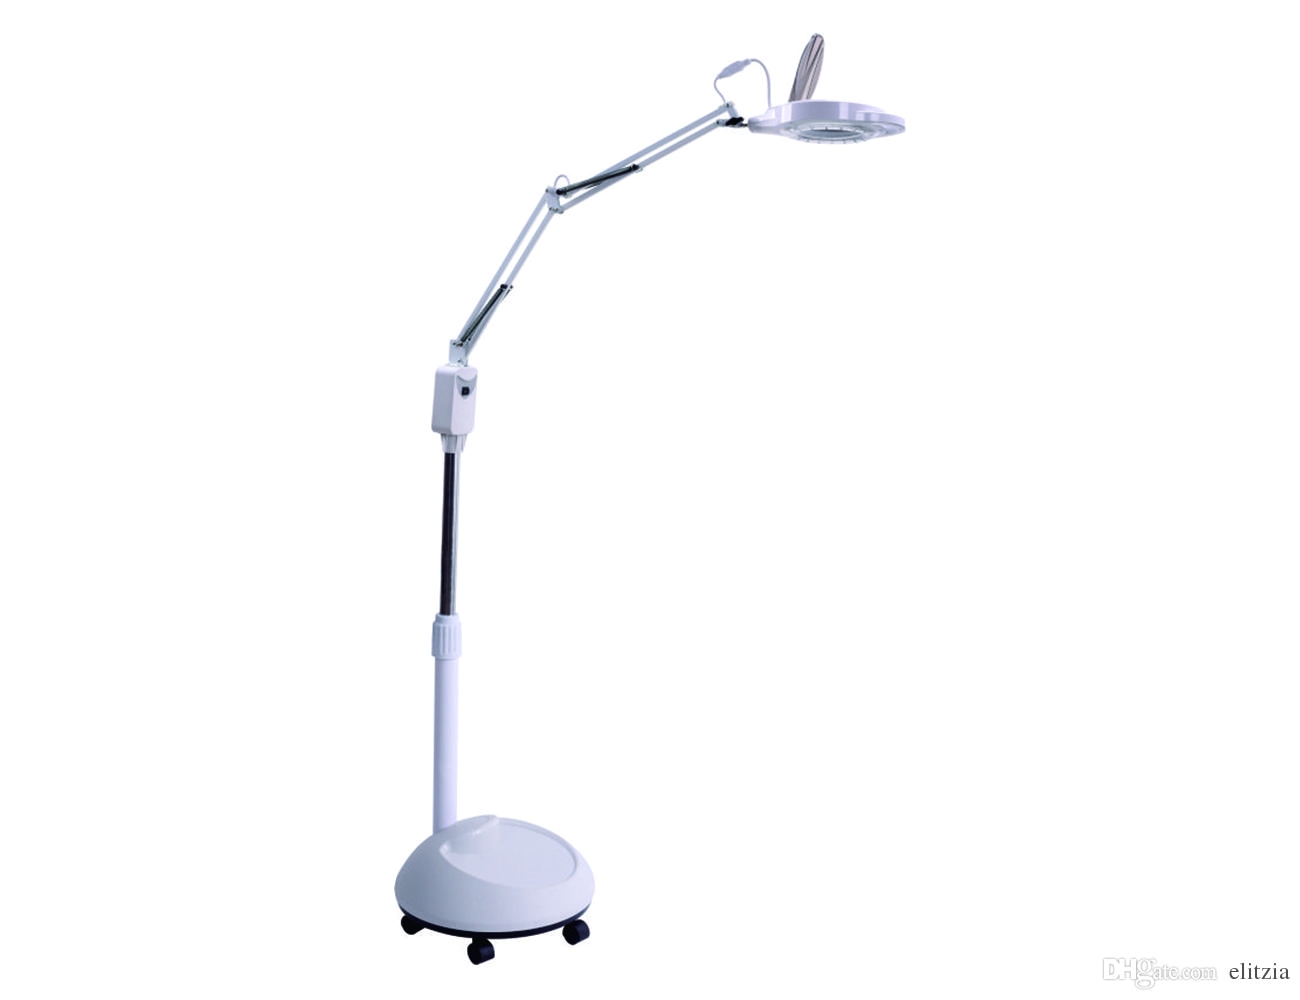 elitzia eth3026 led cold light magnifying lamp 5 times magnification movable pulley base beauty lamp for facial care tattoo or reading magnifying glasses